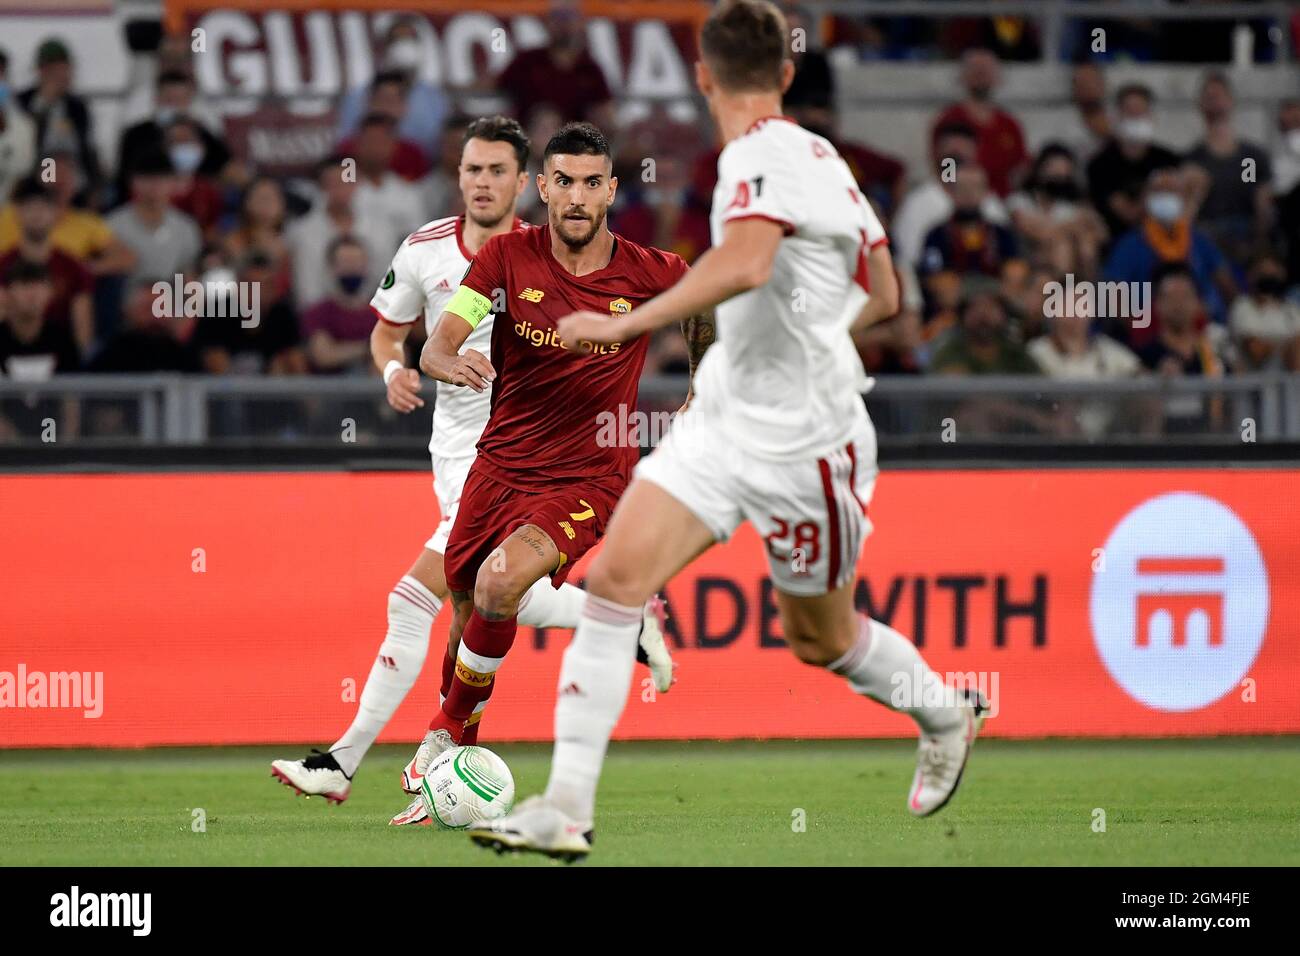 Roma, Italy. 16th Sep, 2021. Lorenzo Pellegrini of AS Roma in action during the Conference league group C football match between AS Roma and PFC CSKA Sofia at Olimpico stadium in Rome (Italy), September 16th, 2021. Photo Antonietta Baldassarre/Insidefoto Credit: insidefoto srl/Alamy Live News Stock Photo